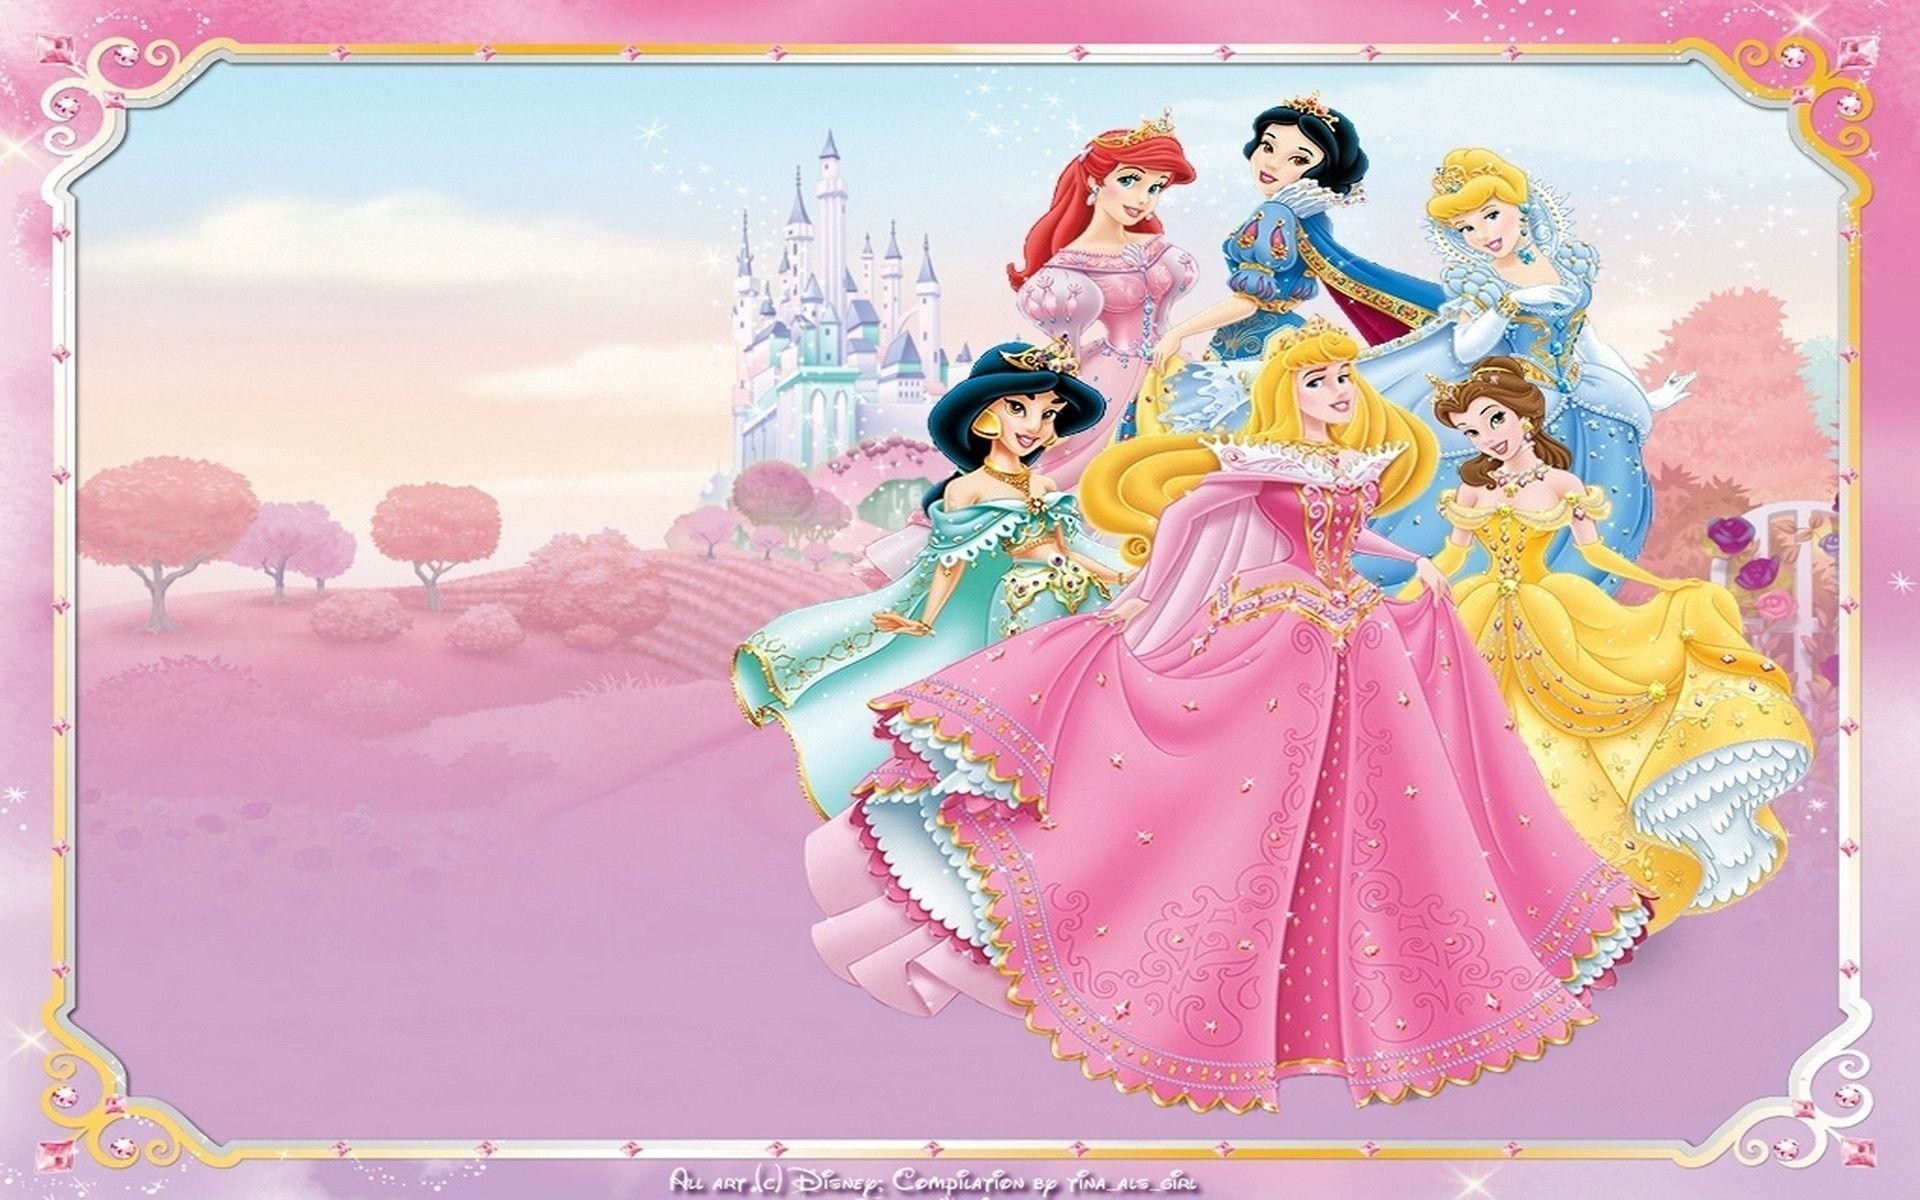 Disney princesses wallpapers pictures